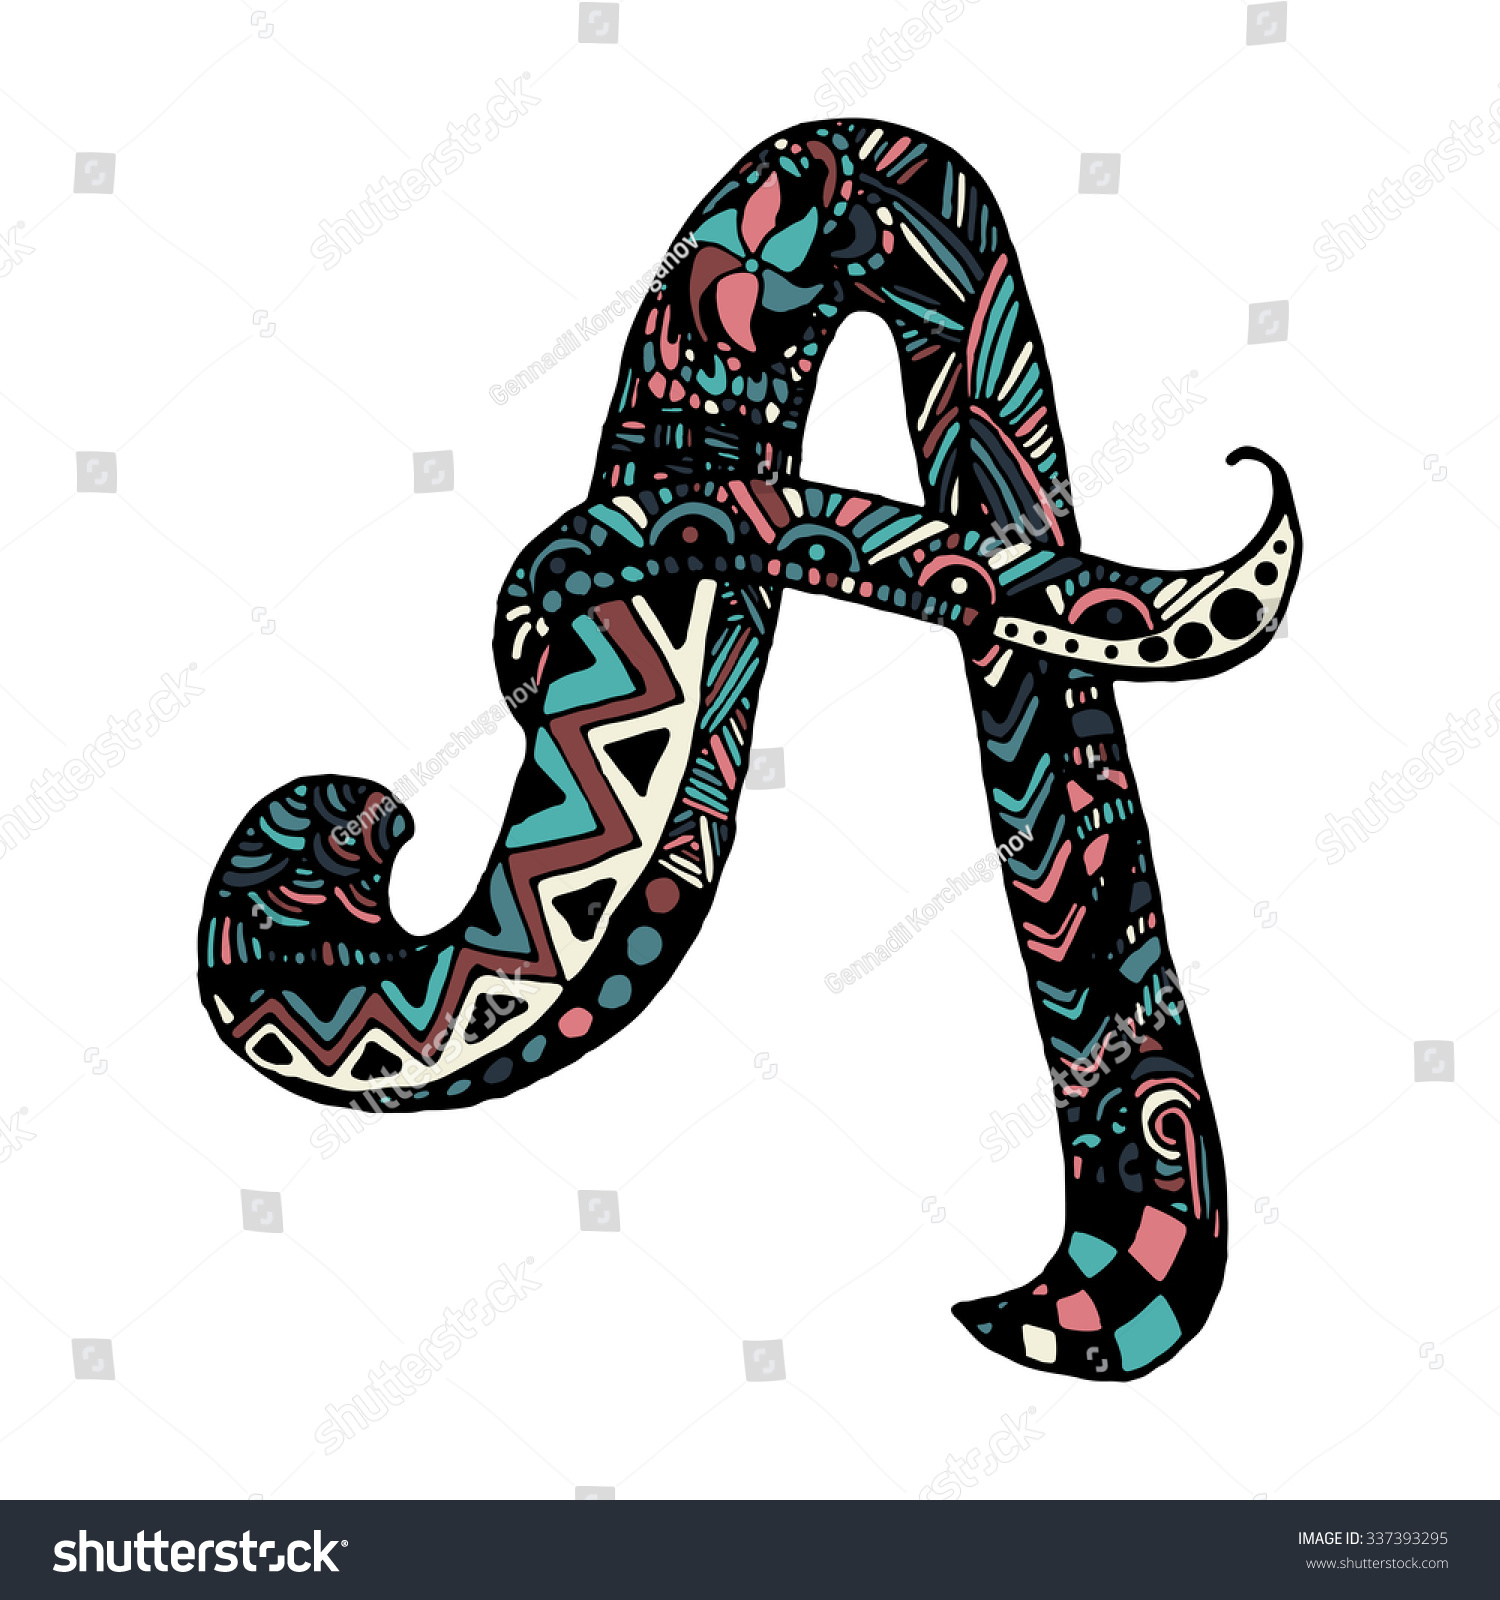 Hand Draw The Letter A Zentangl Trend Patterns Painted In Different ...